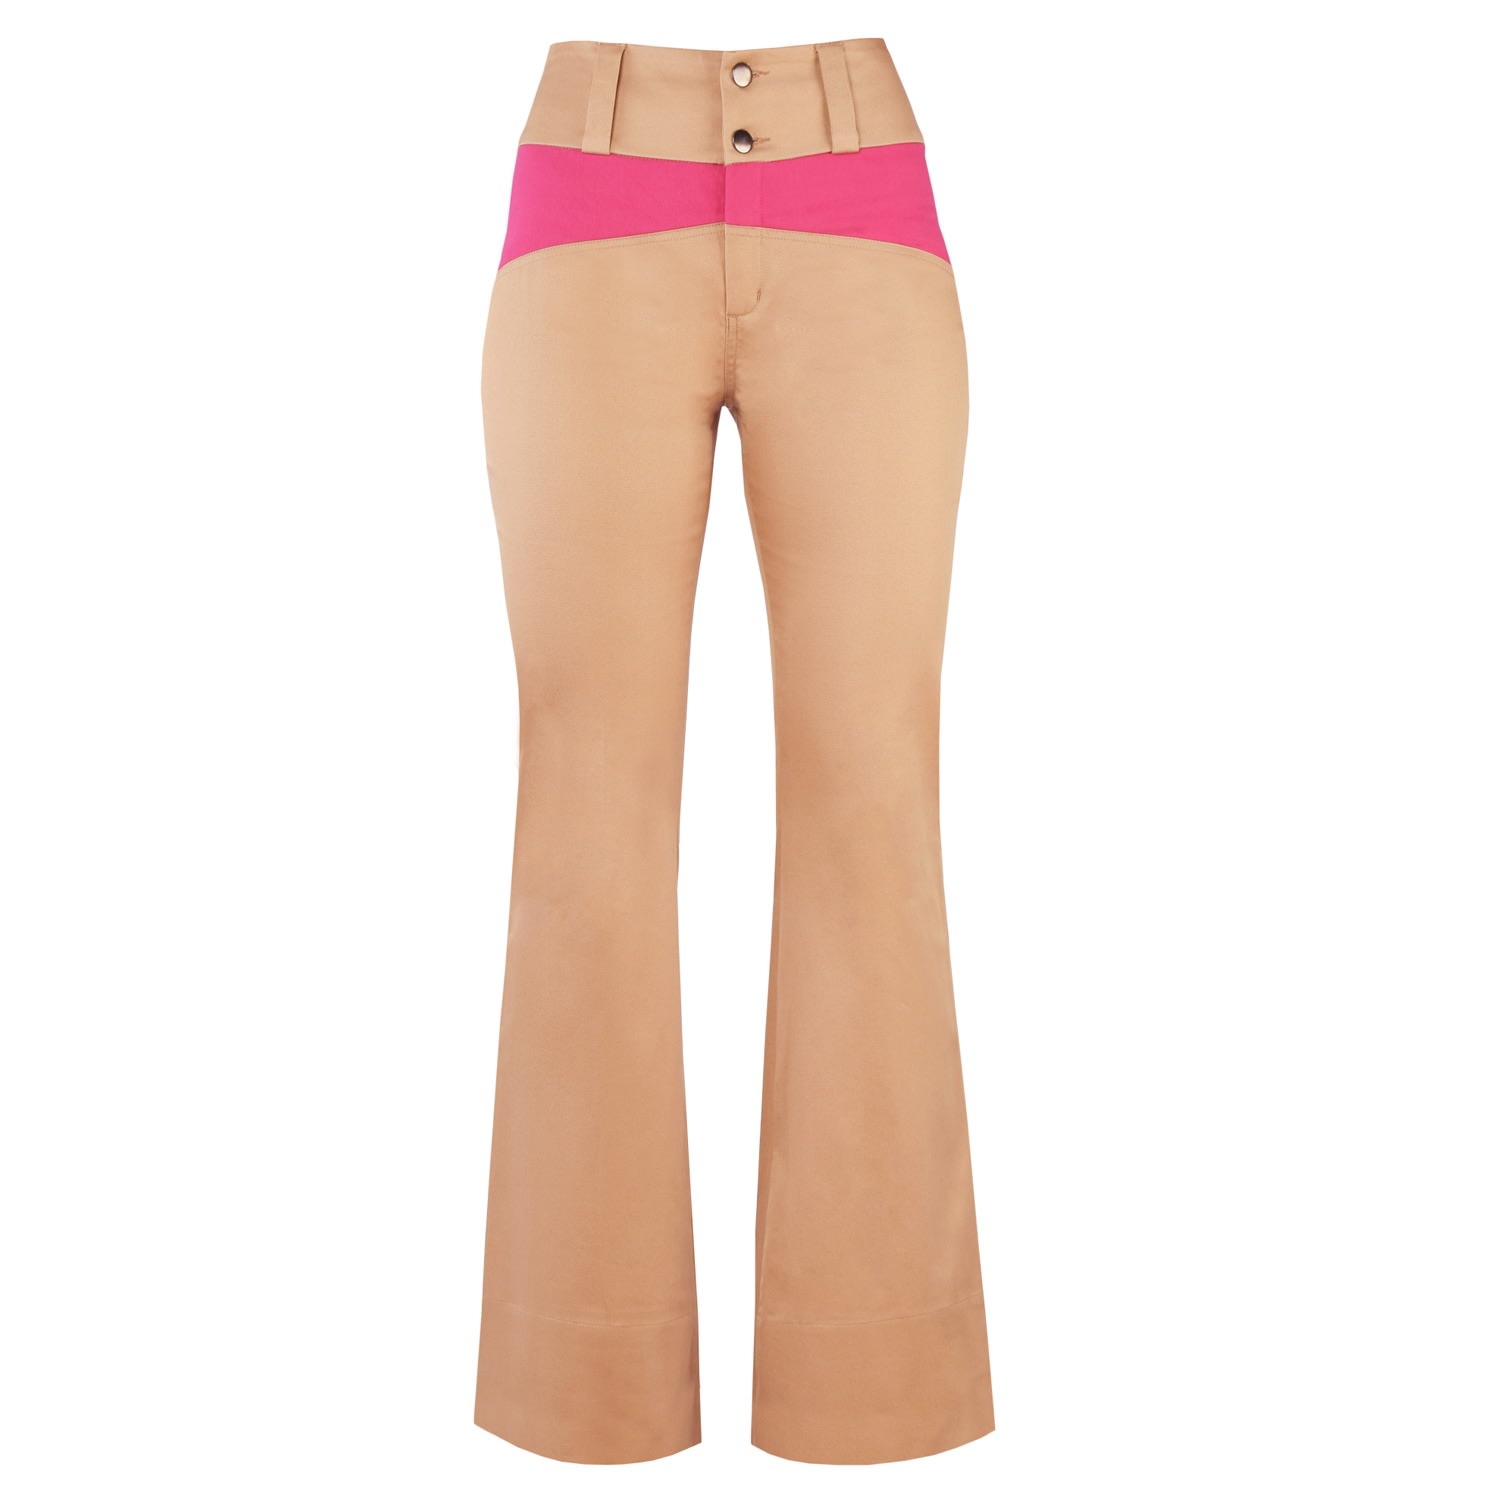 Women's Neutrals Rejoice Flared Trousers In Beige And Pink Extra Small blonde gone rogue